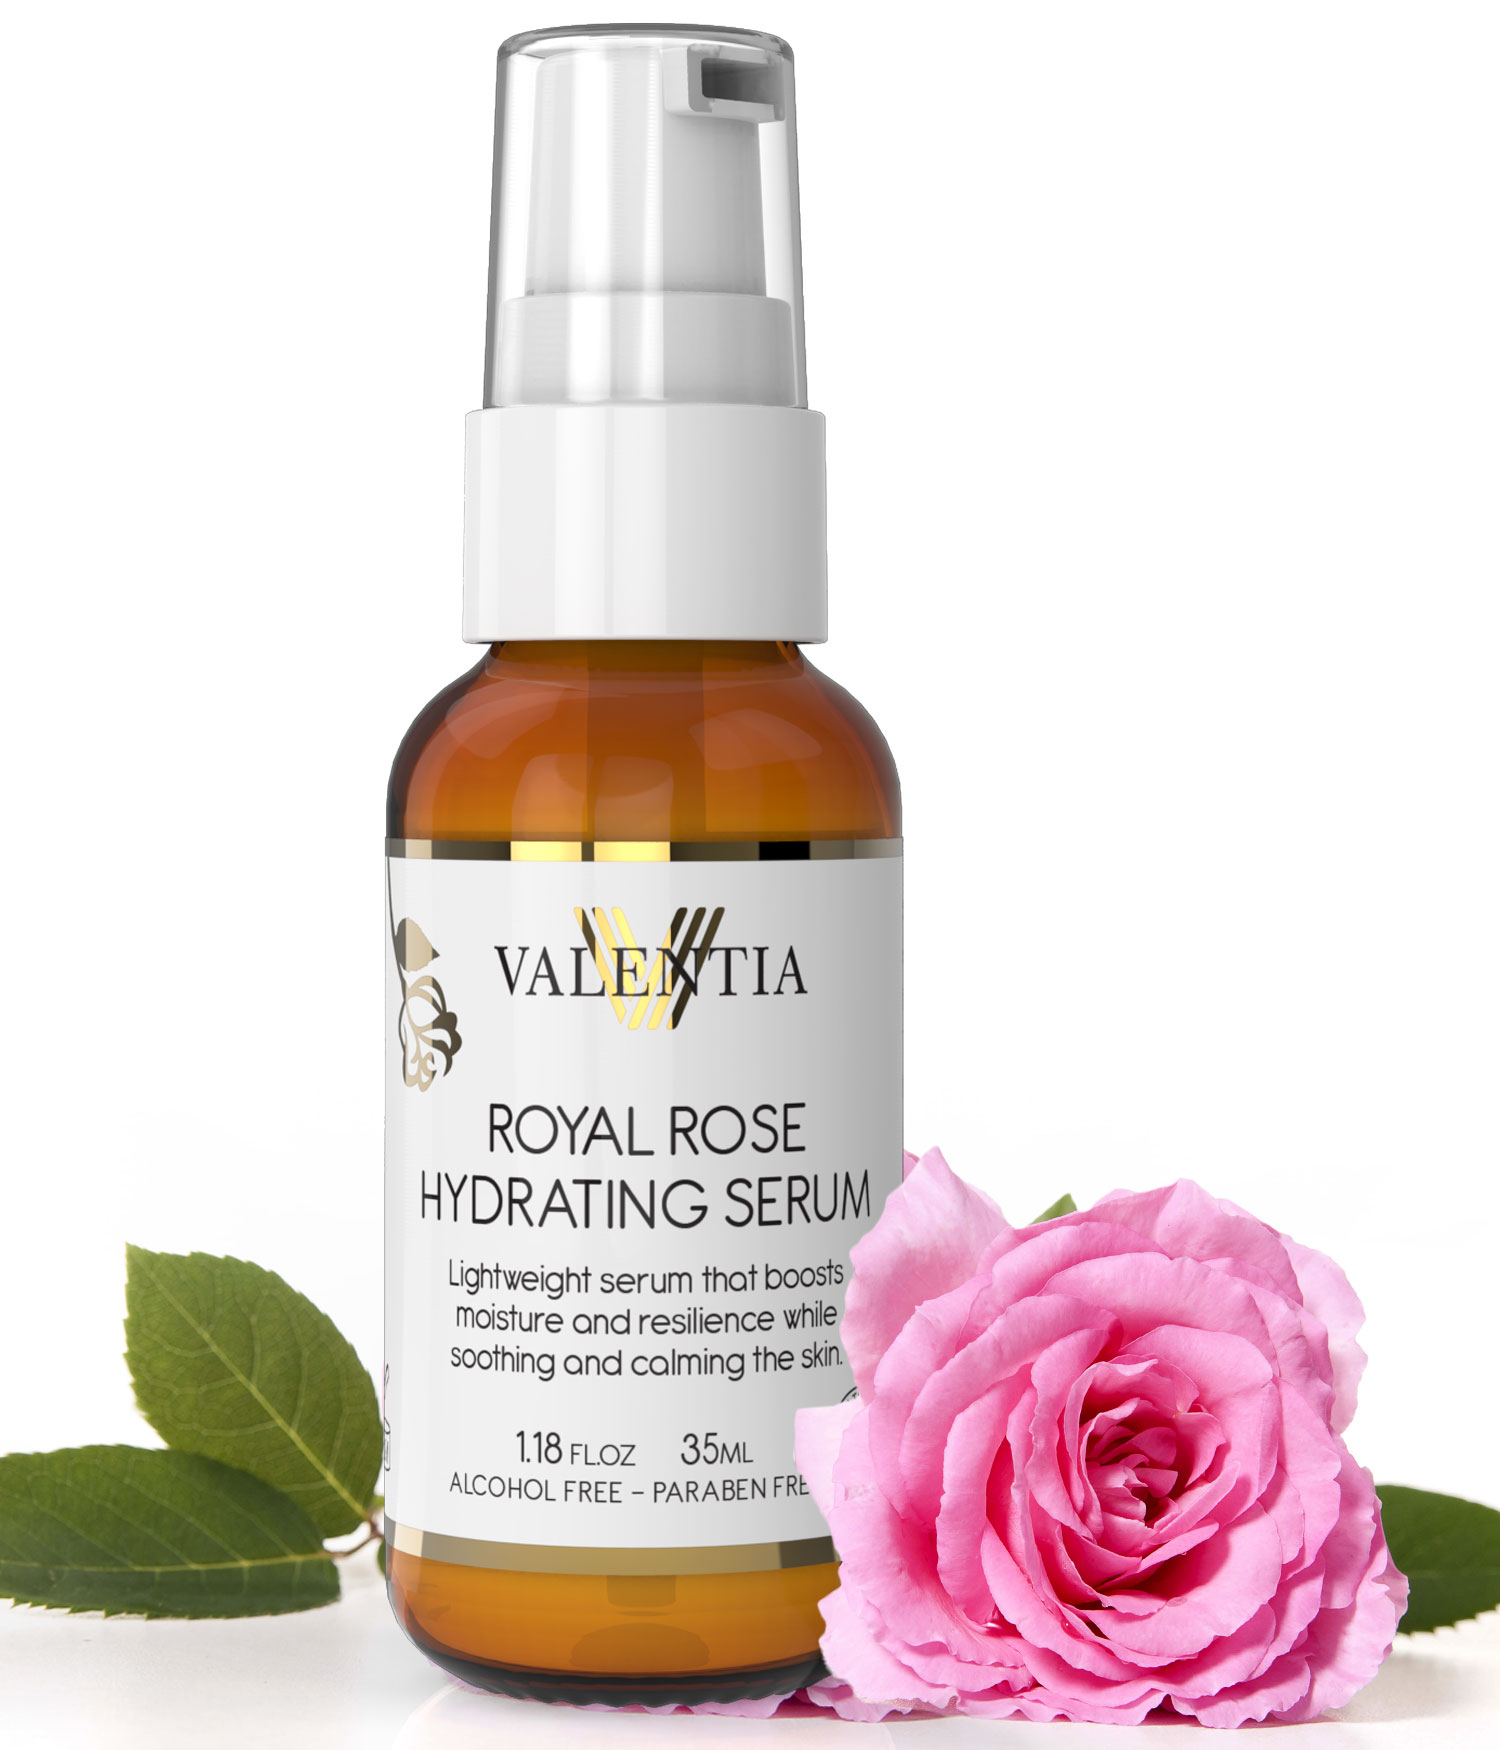 valentia royal rose hydrating serum, skin care, anti aging, no animal testing, organic makeup, company owned by women,